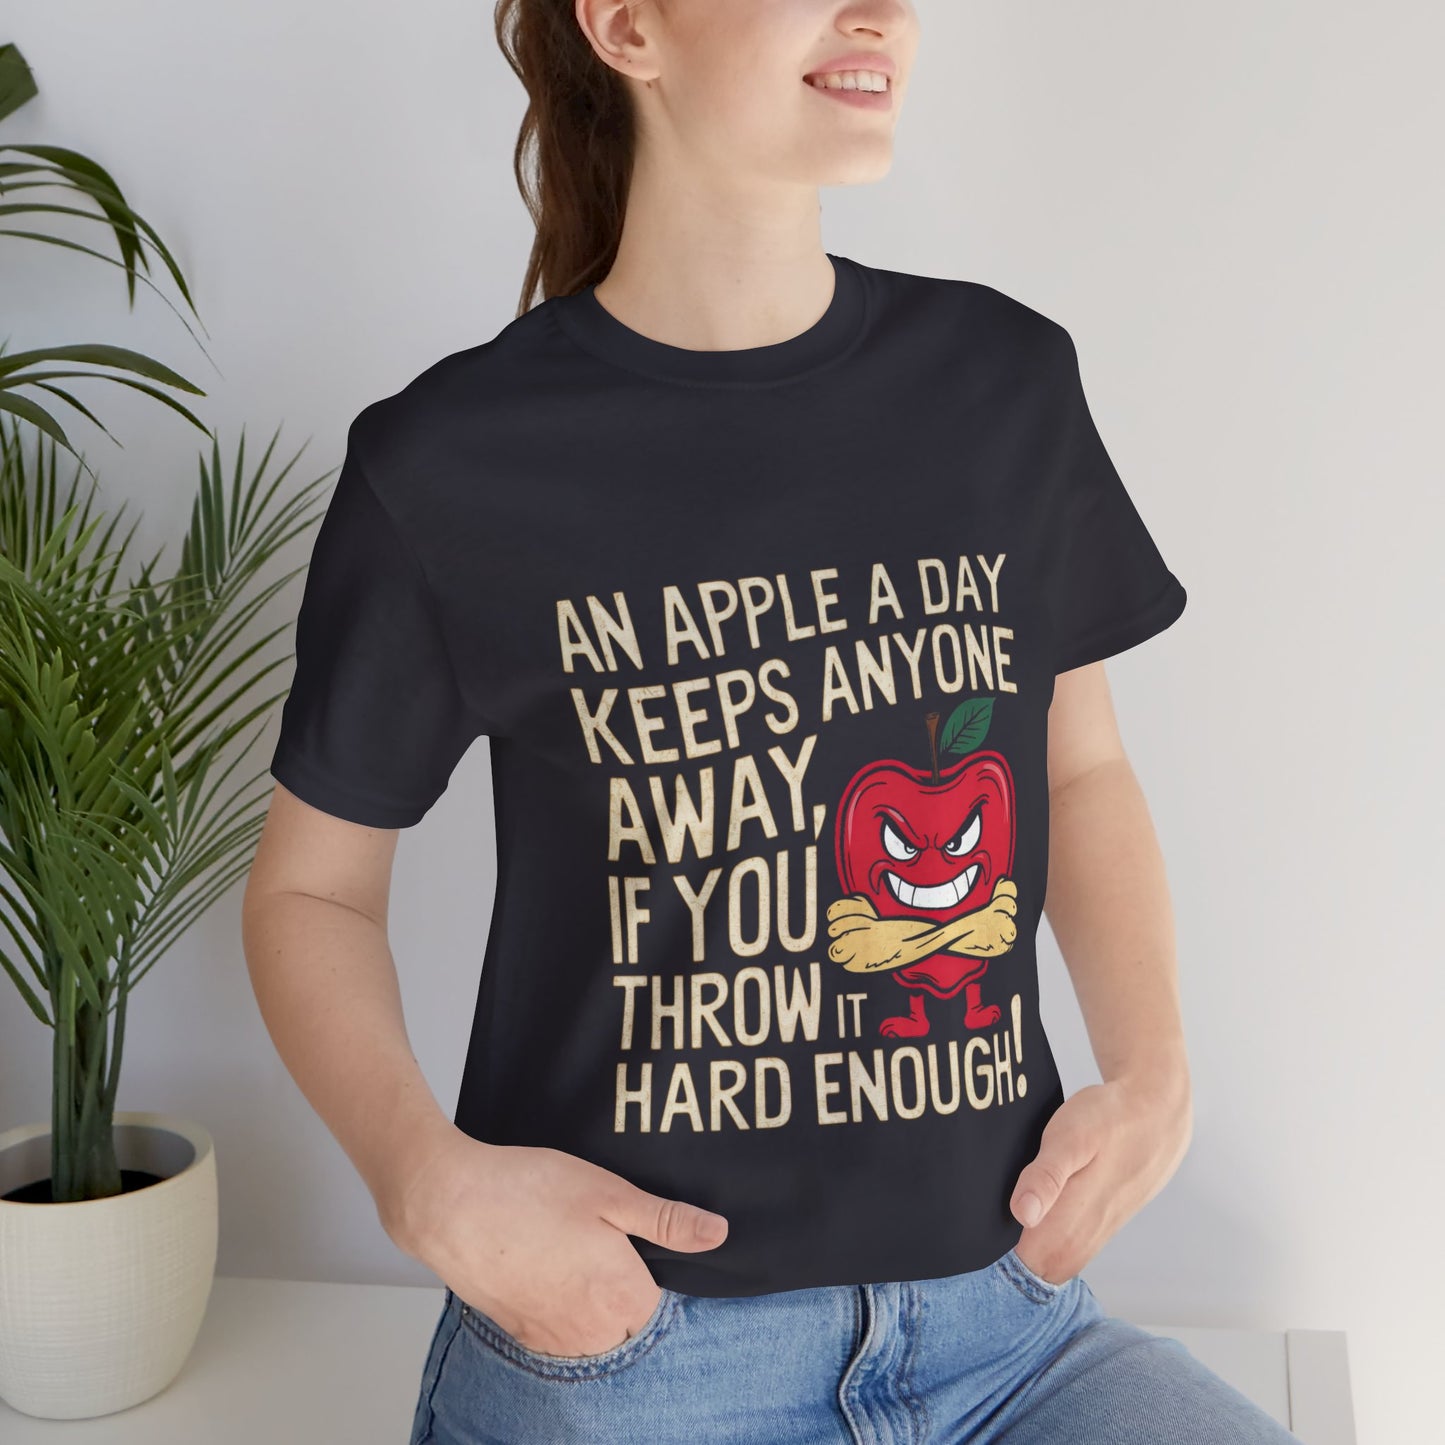 An Apple a Day Keeps Anyone Away if You Throw it Hard Enough - Funny T-Shirt by Stichas T-Shirt Company